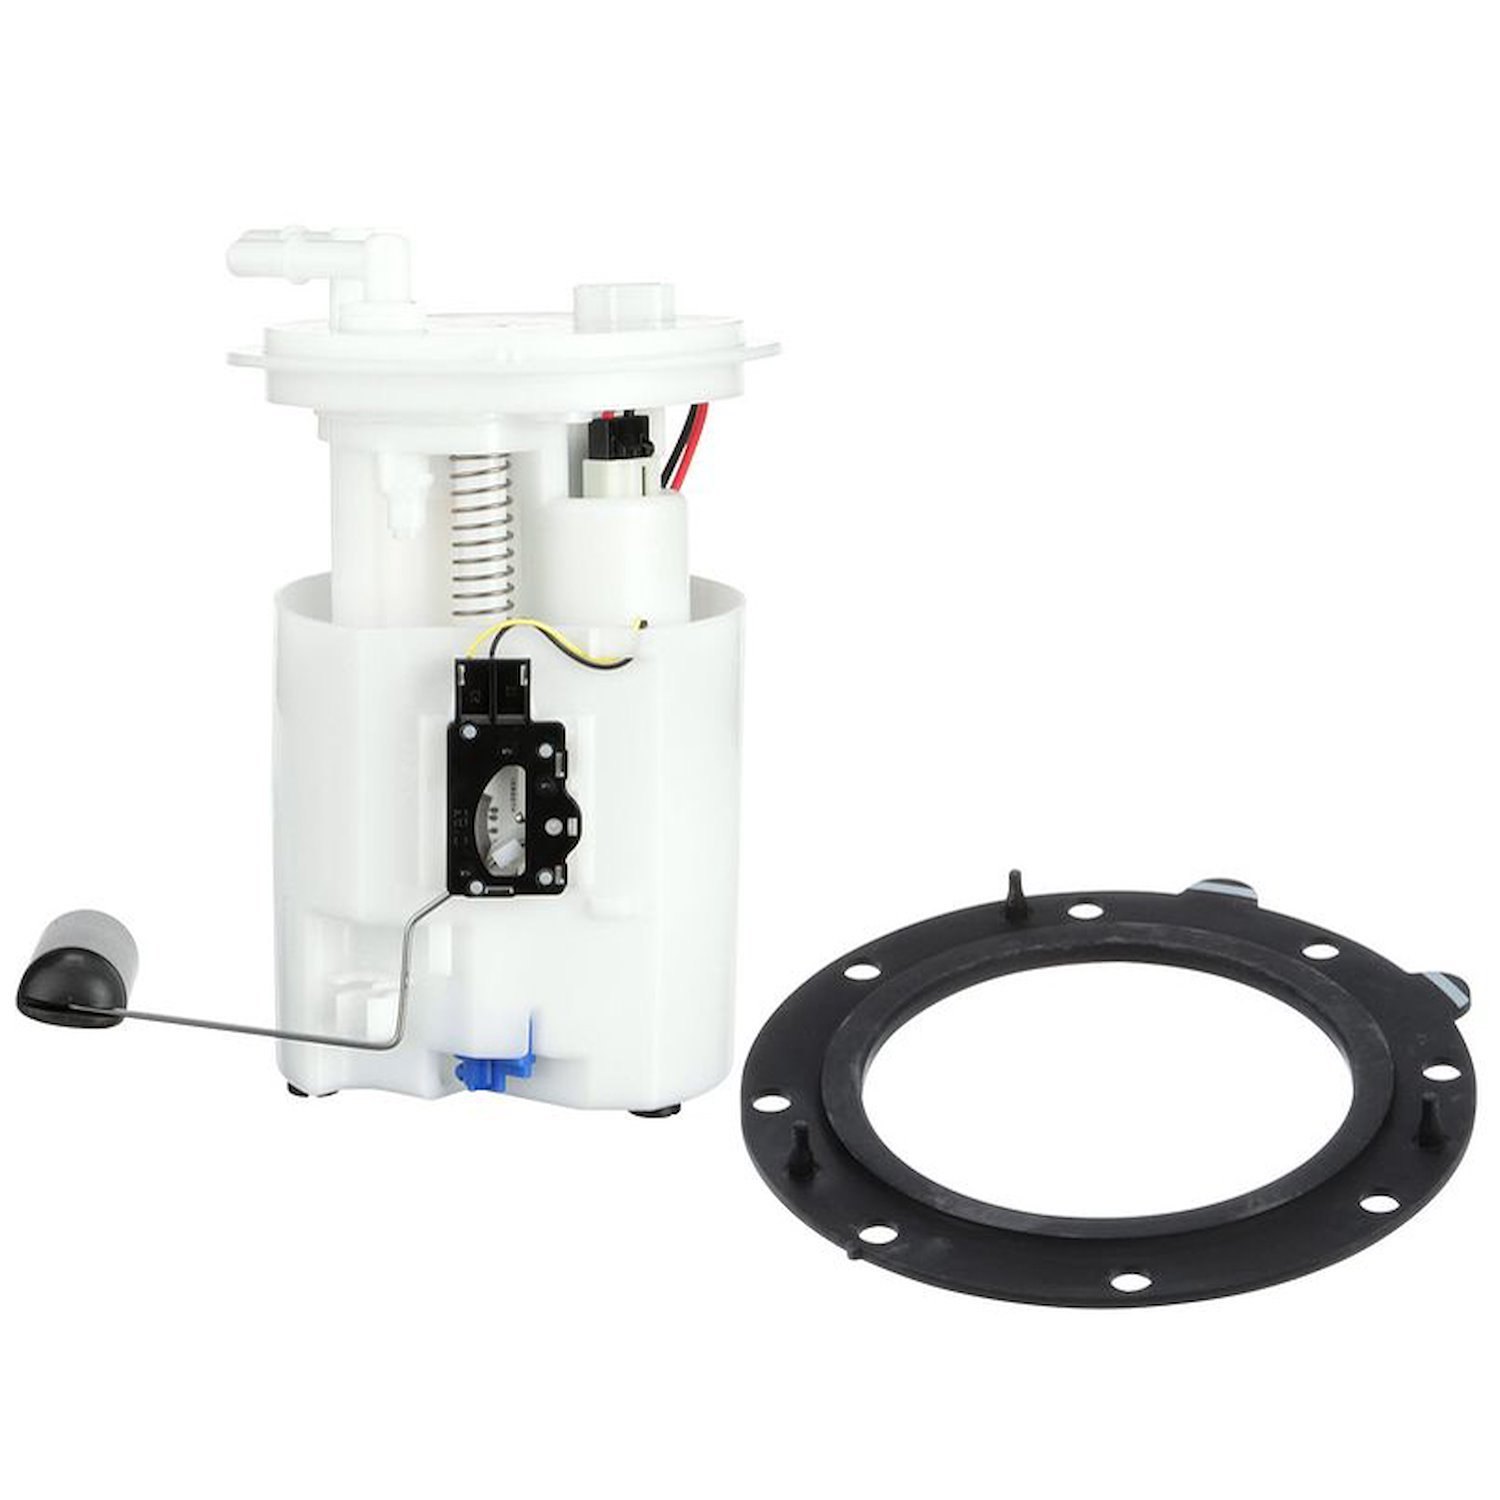 OE Replacement Fuel Pump Module Assembly for 2013-2014 for Subaru Legacy/Outback